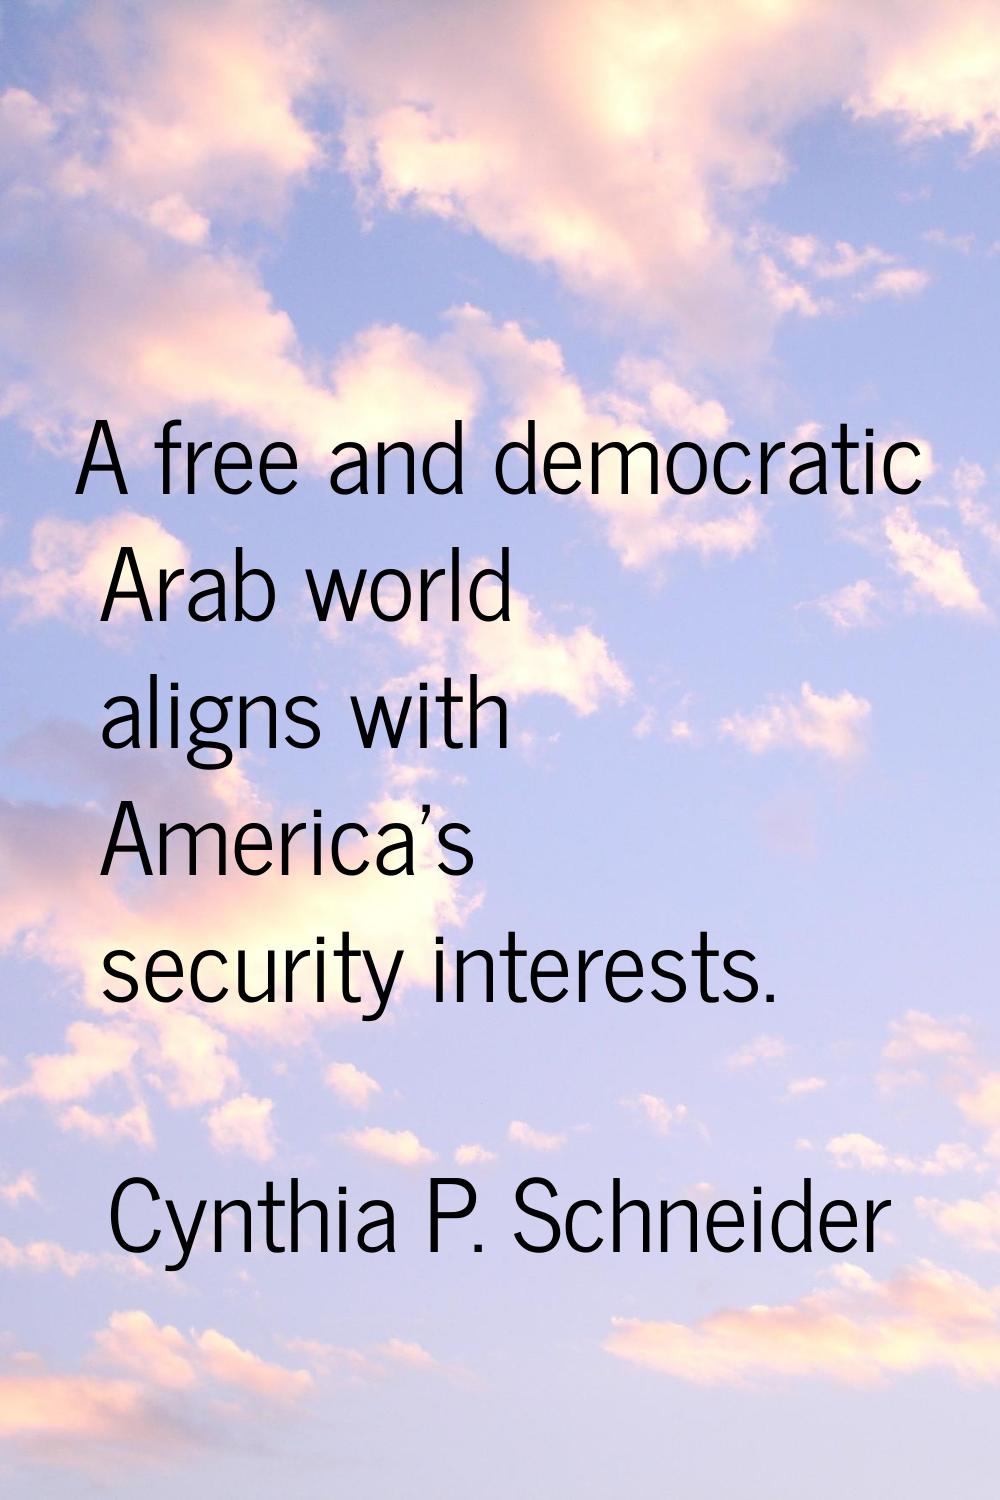 A free and democratic Arab world aligns with America's security interests.